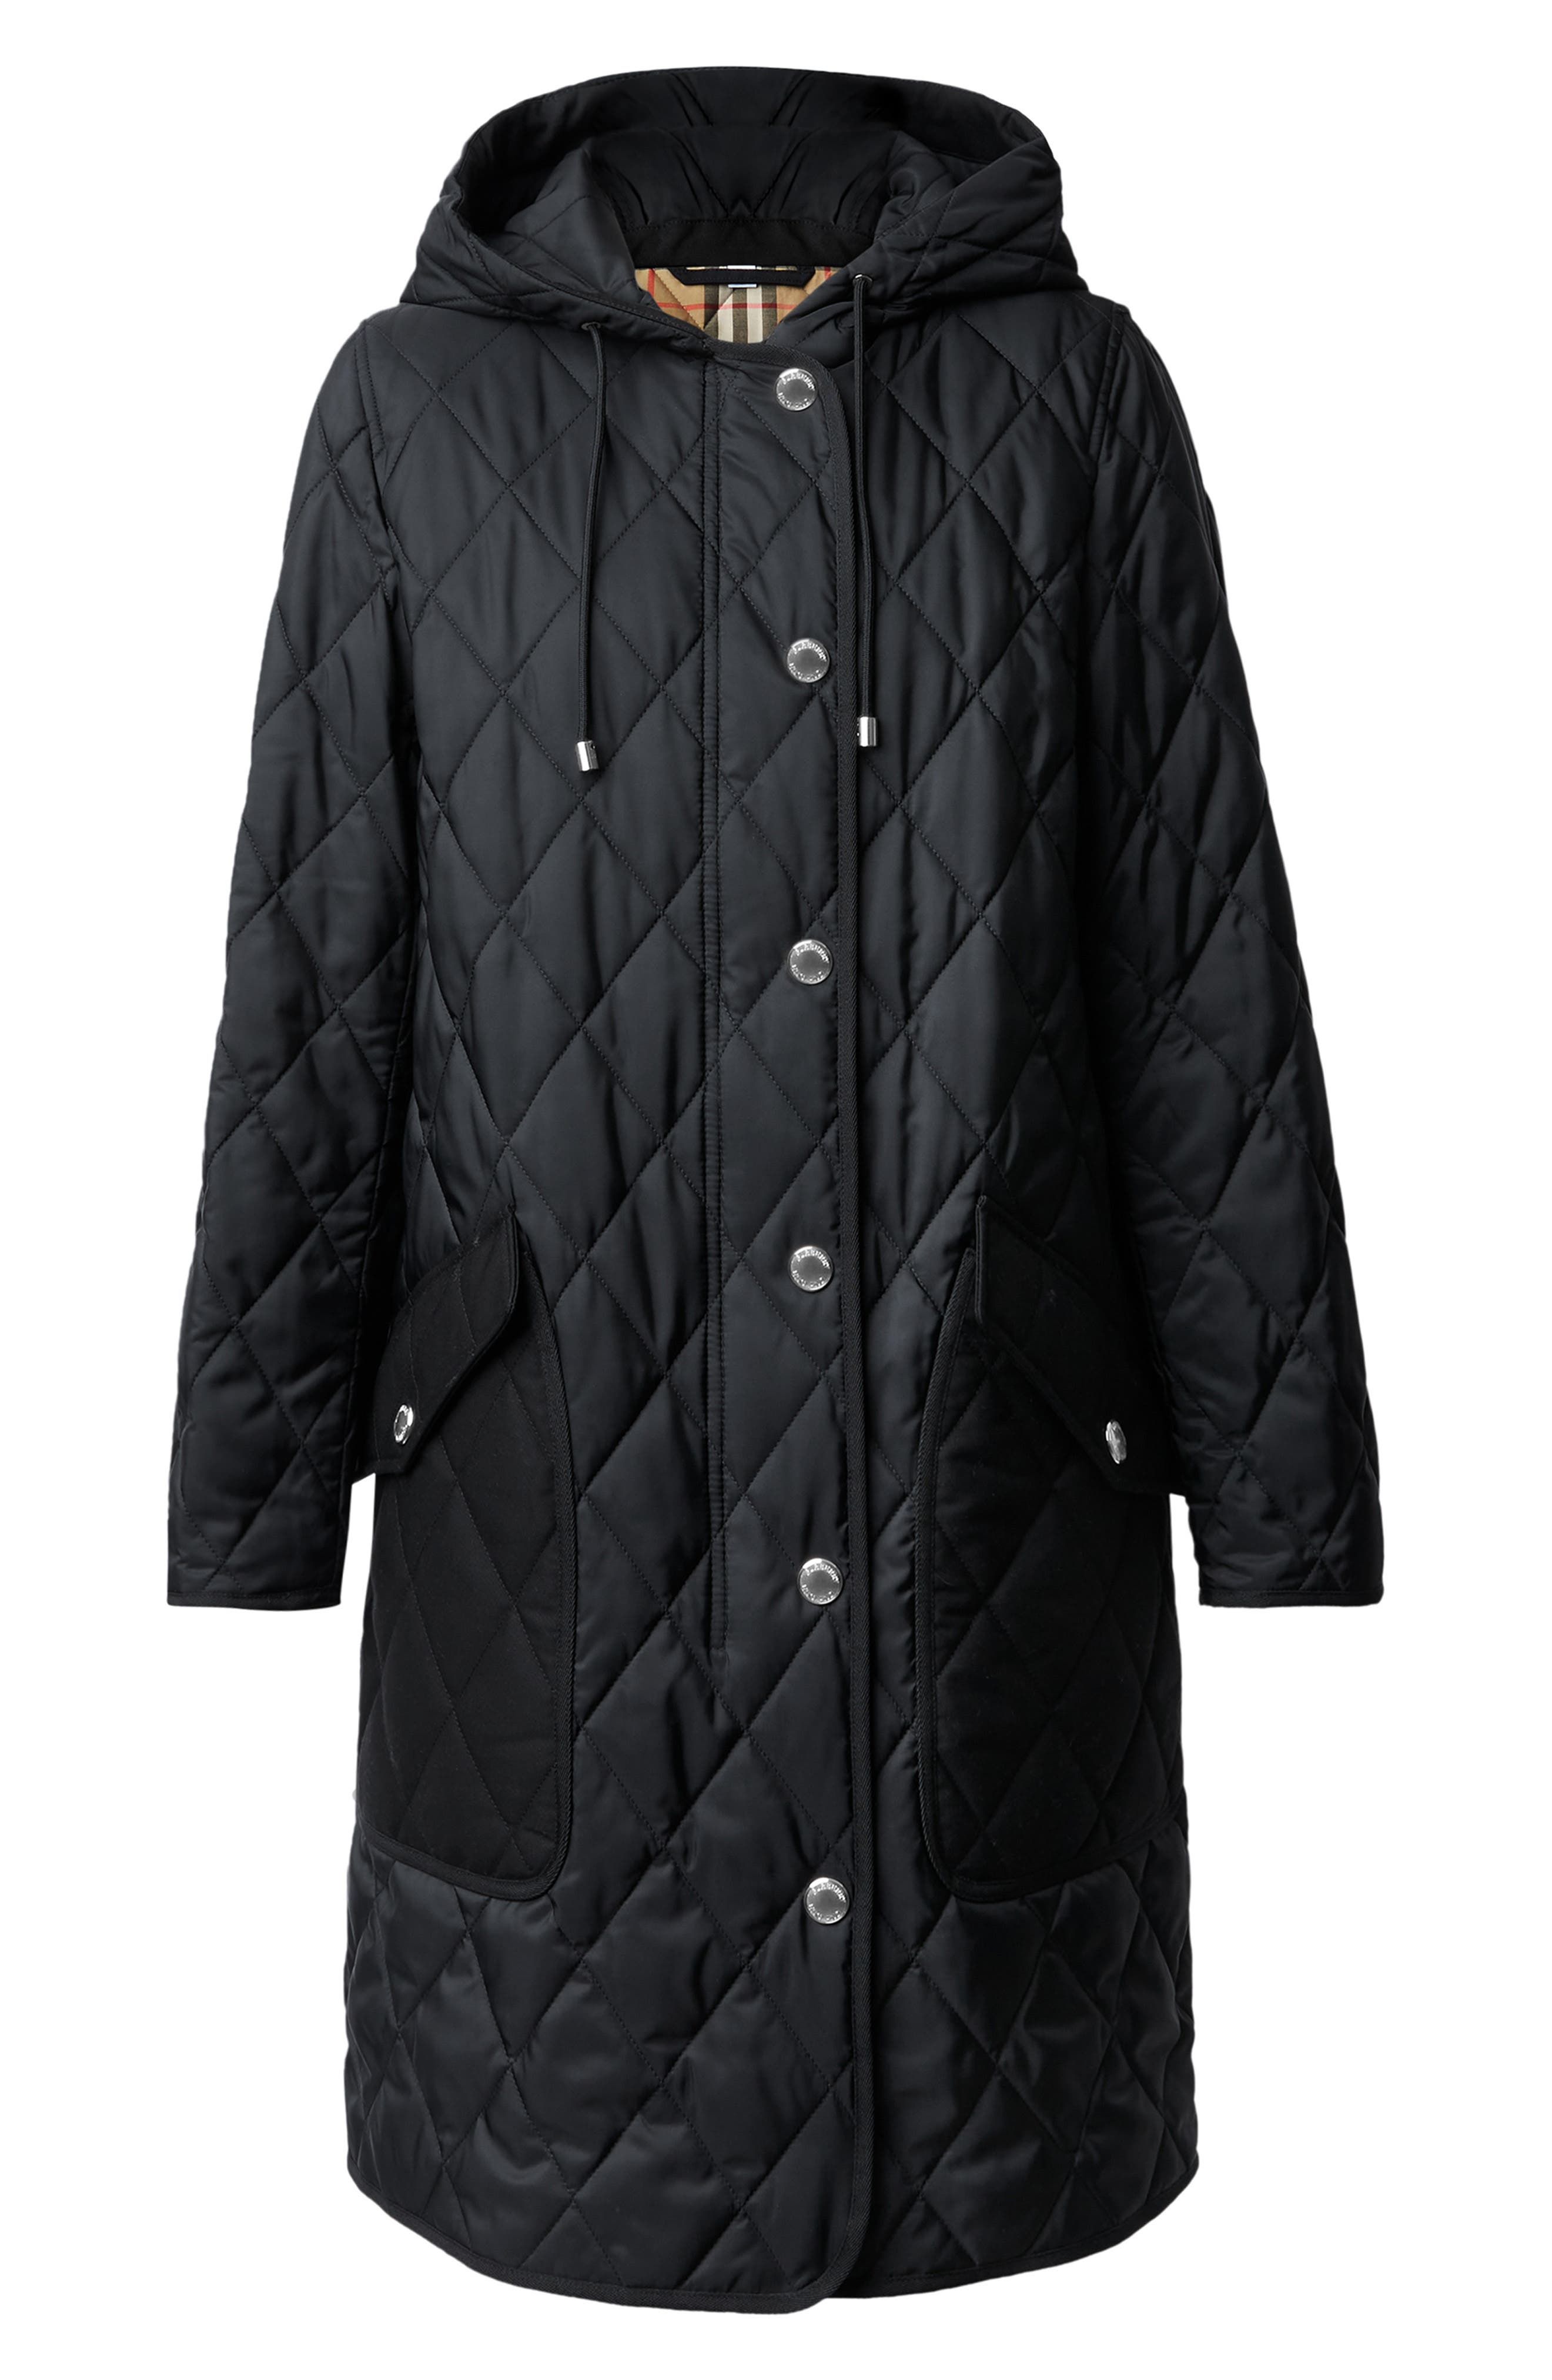 burberry quilted jacket with hoodie